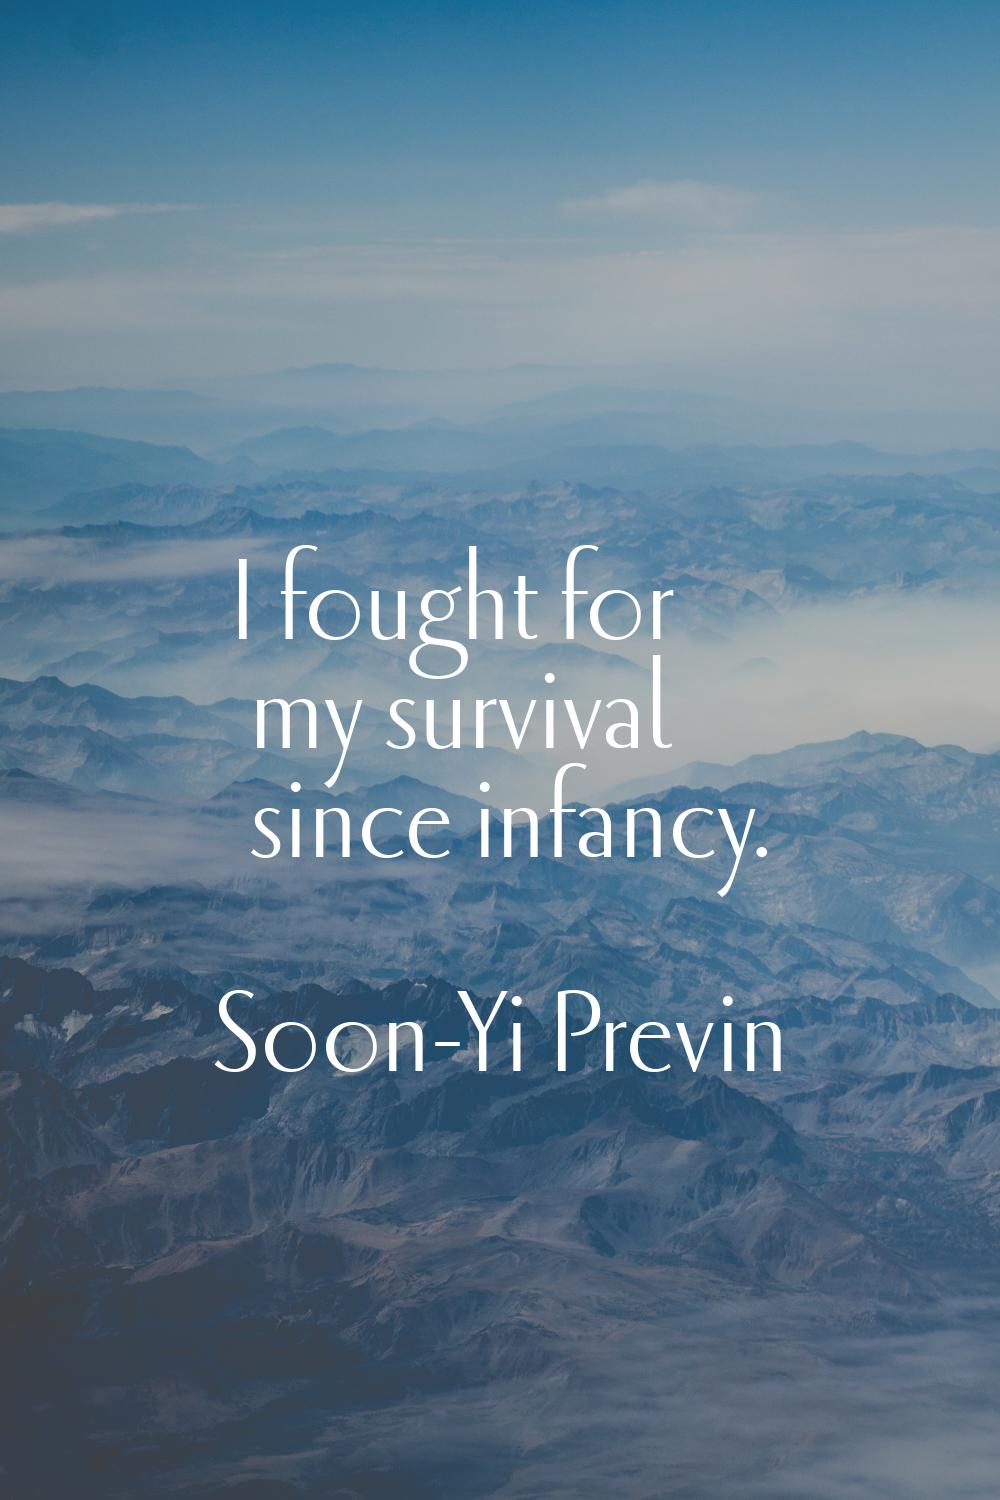 I fought for my survival since infancy.